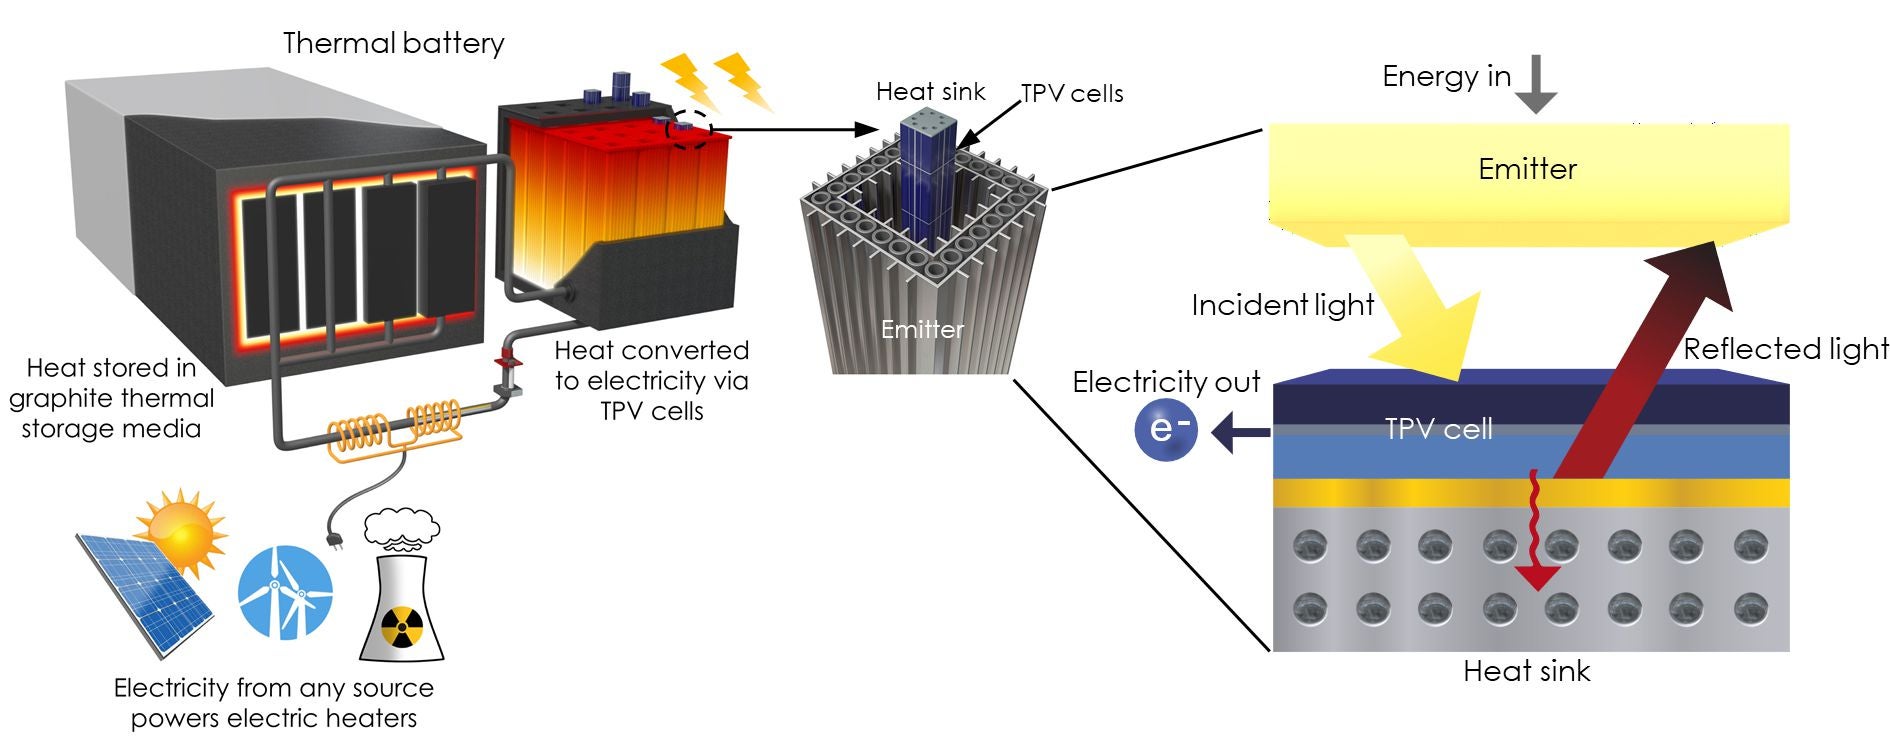 The thermal energy grid storage system features blocks of graphite to store heat (left) and a tower made of the heat engines (centre), which work by absorbing high-energy photons (right). (Illustration: Alina LaPotin)